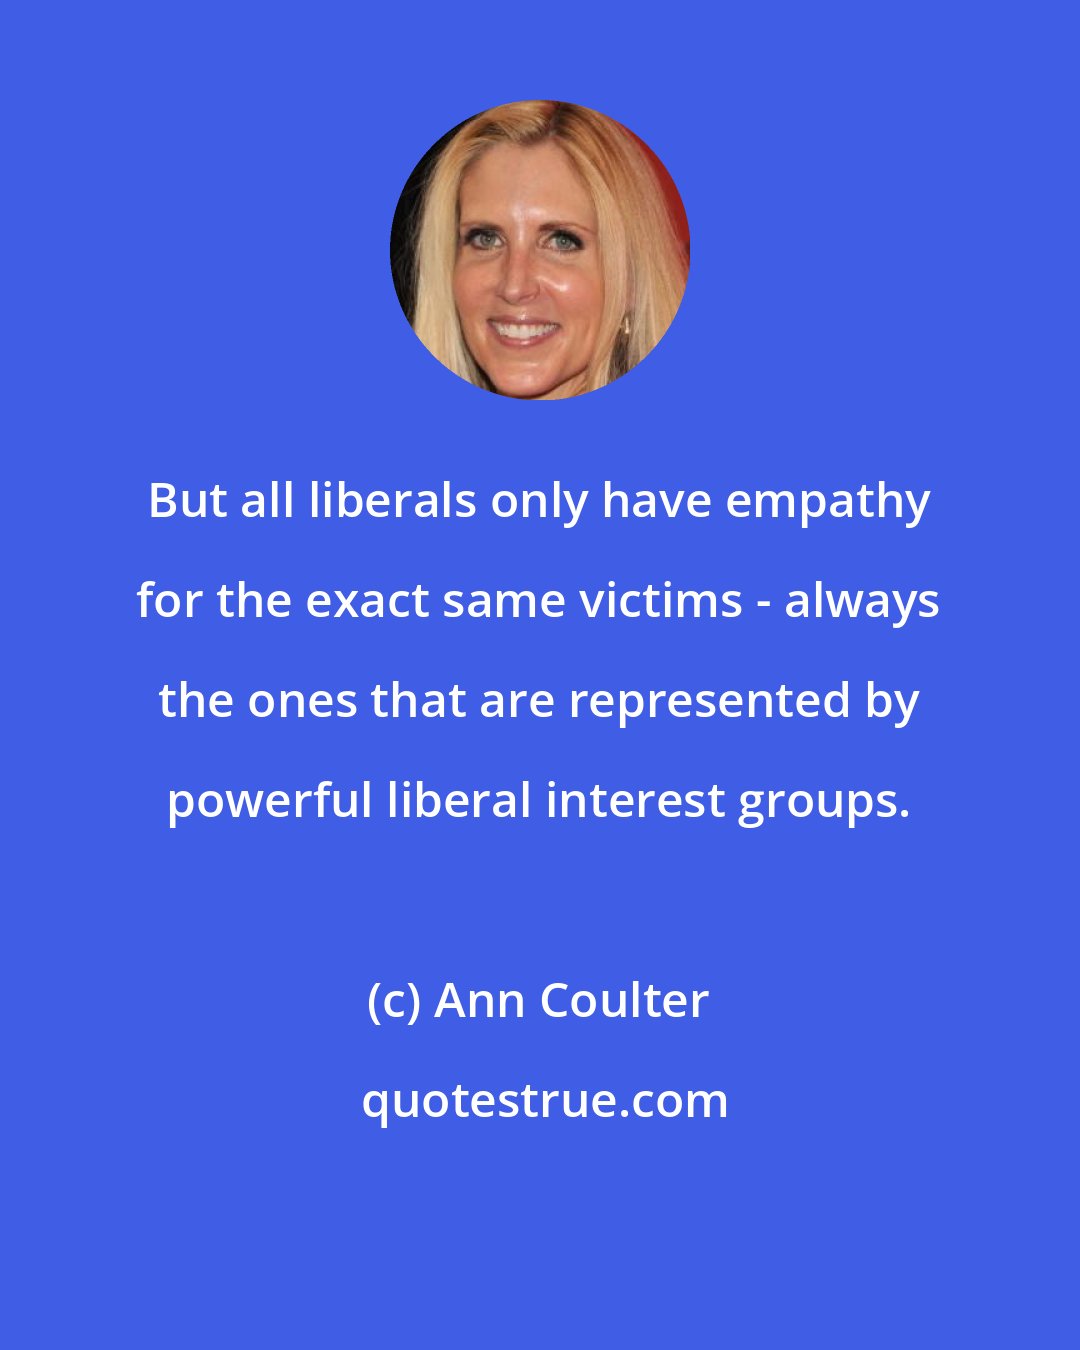 Ann Coulter: But all liberals only have empathy for the exact same victims - always the ones that are represented by powerful liberal interest groups.